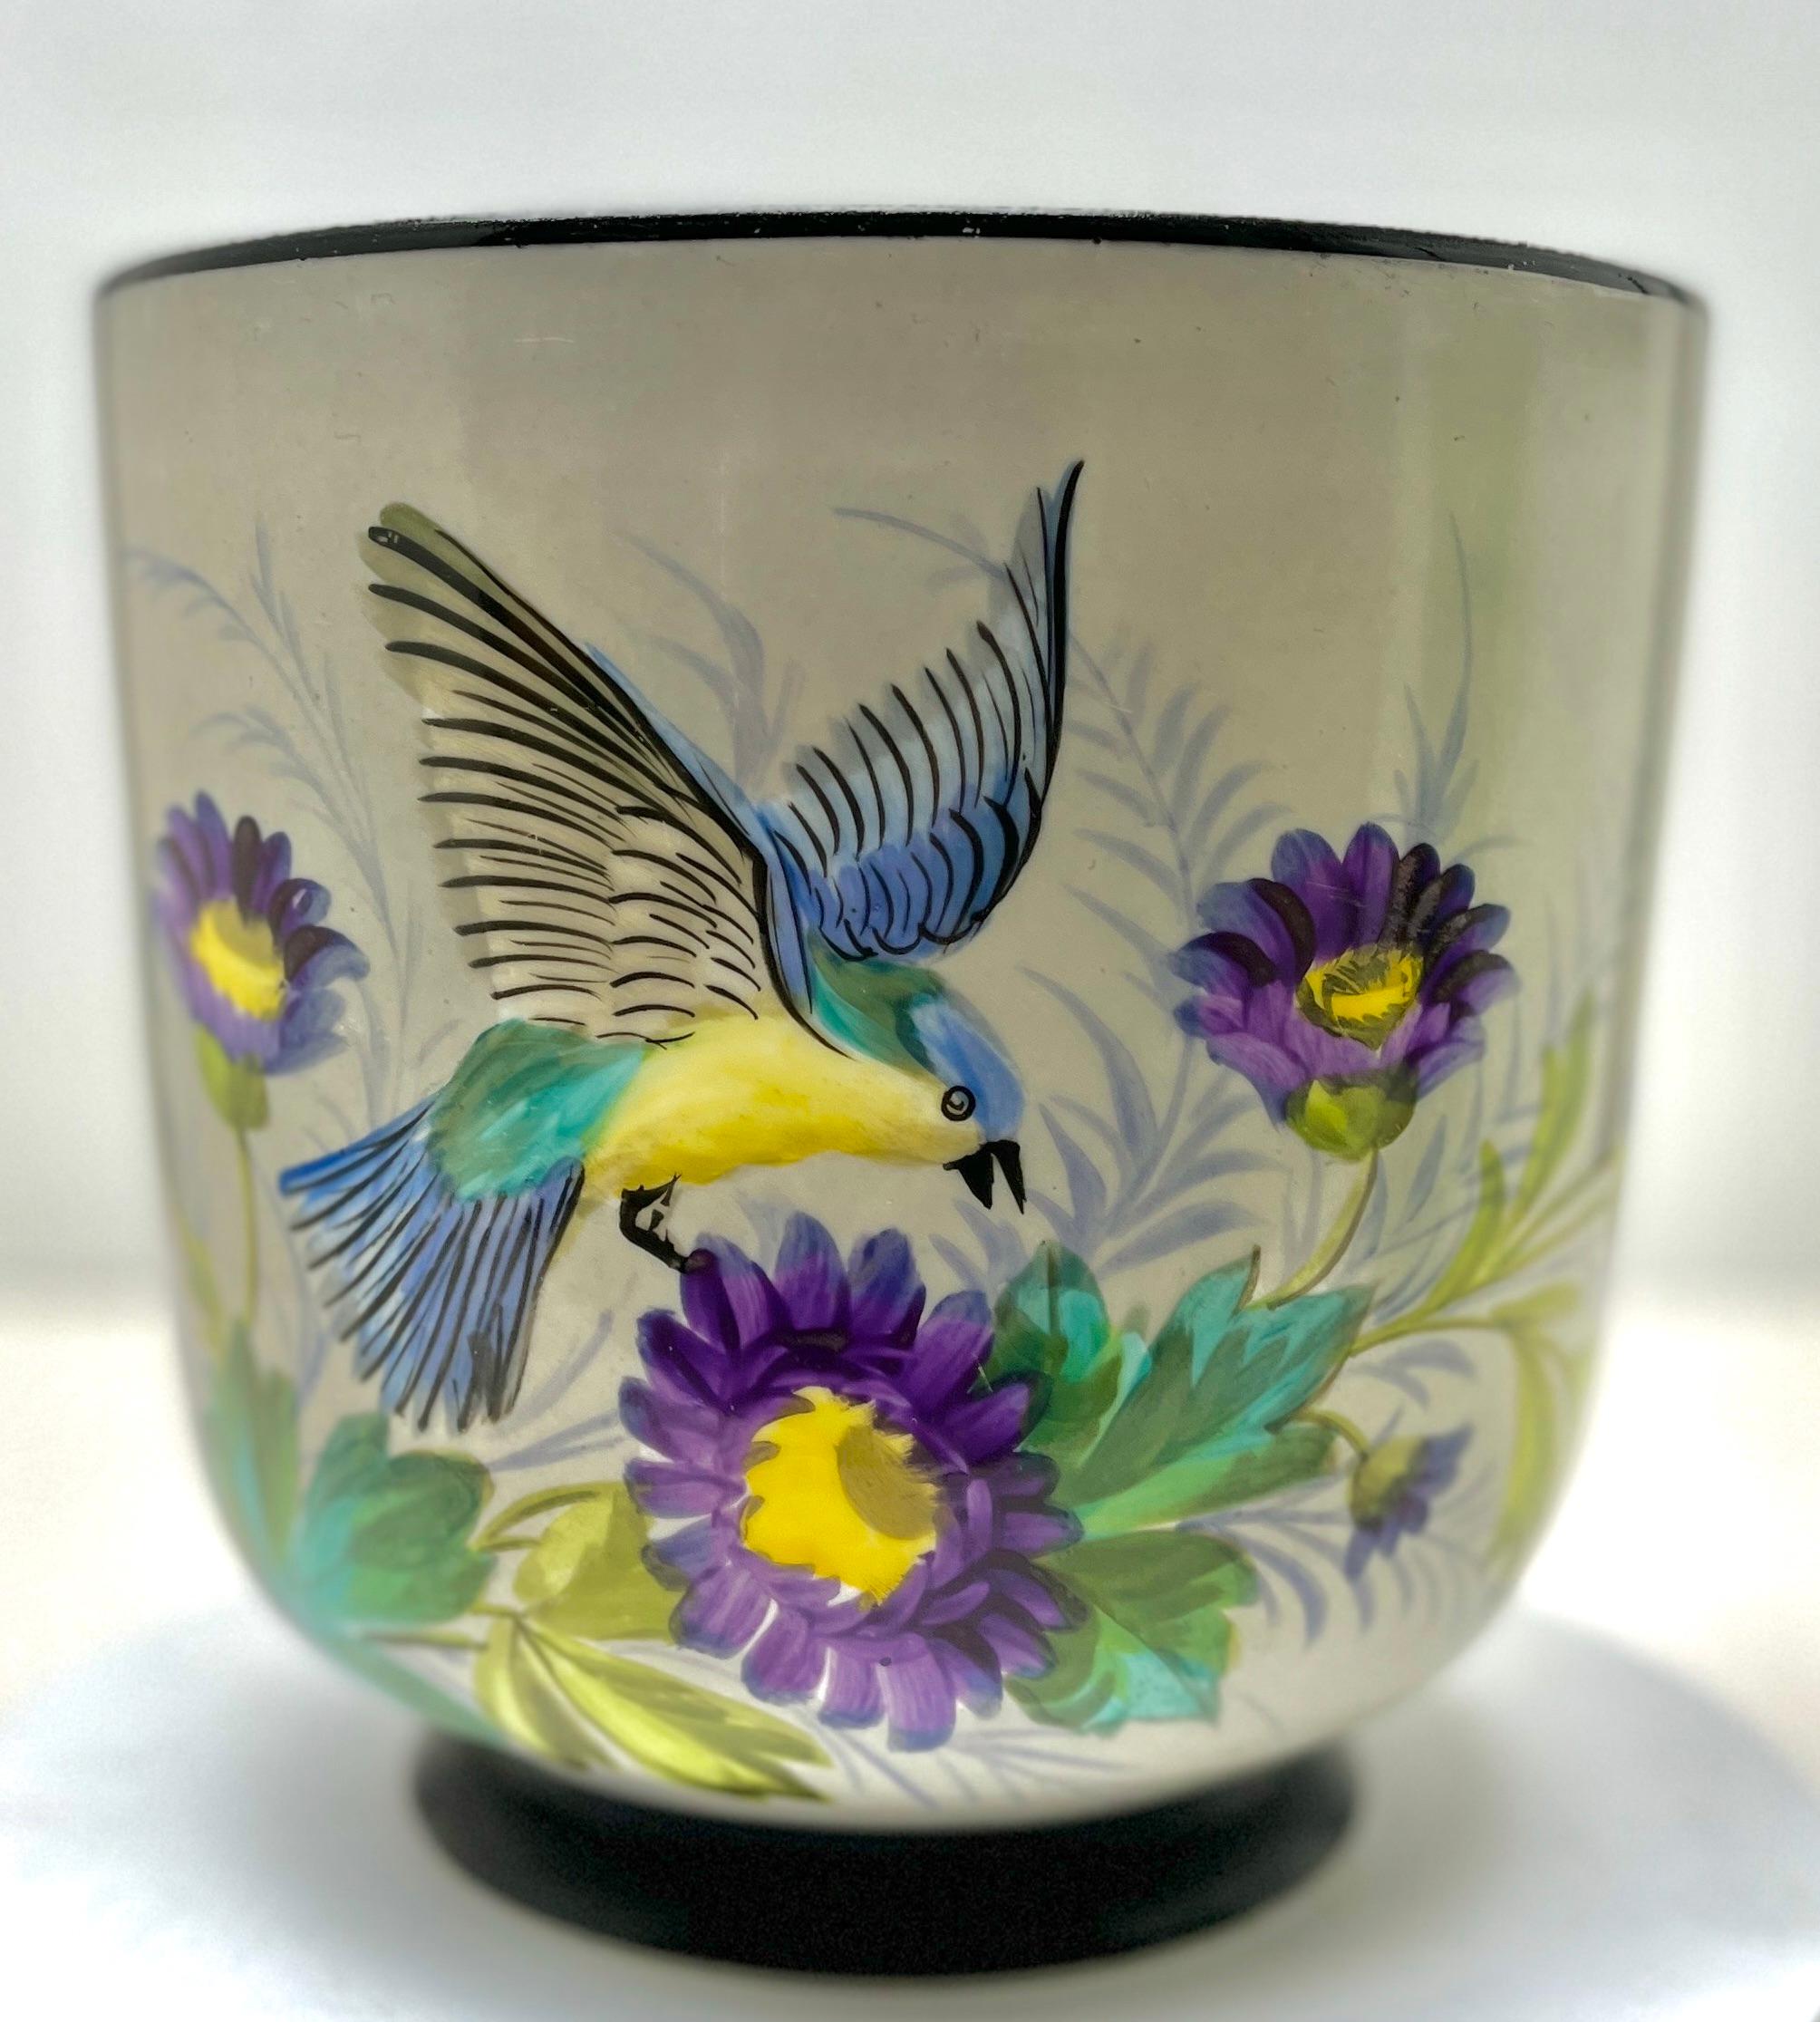 French Porcelain Planter, Cachepot Hand-Painted Whit Bird and Flowers